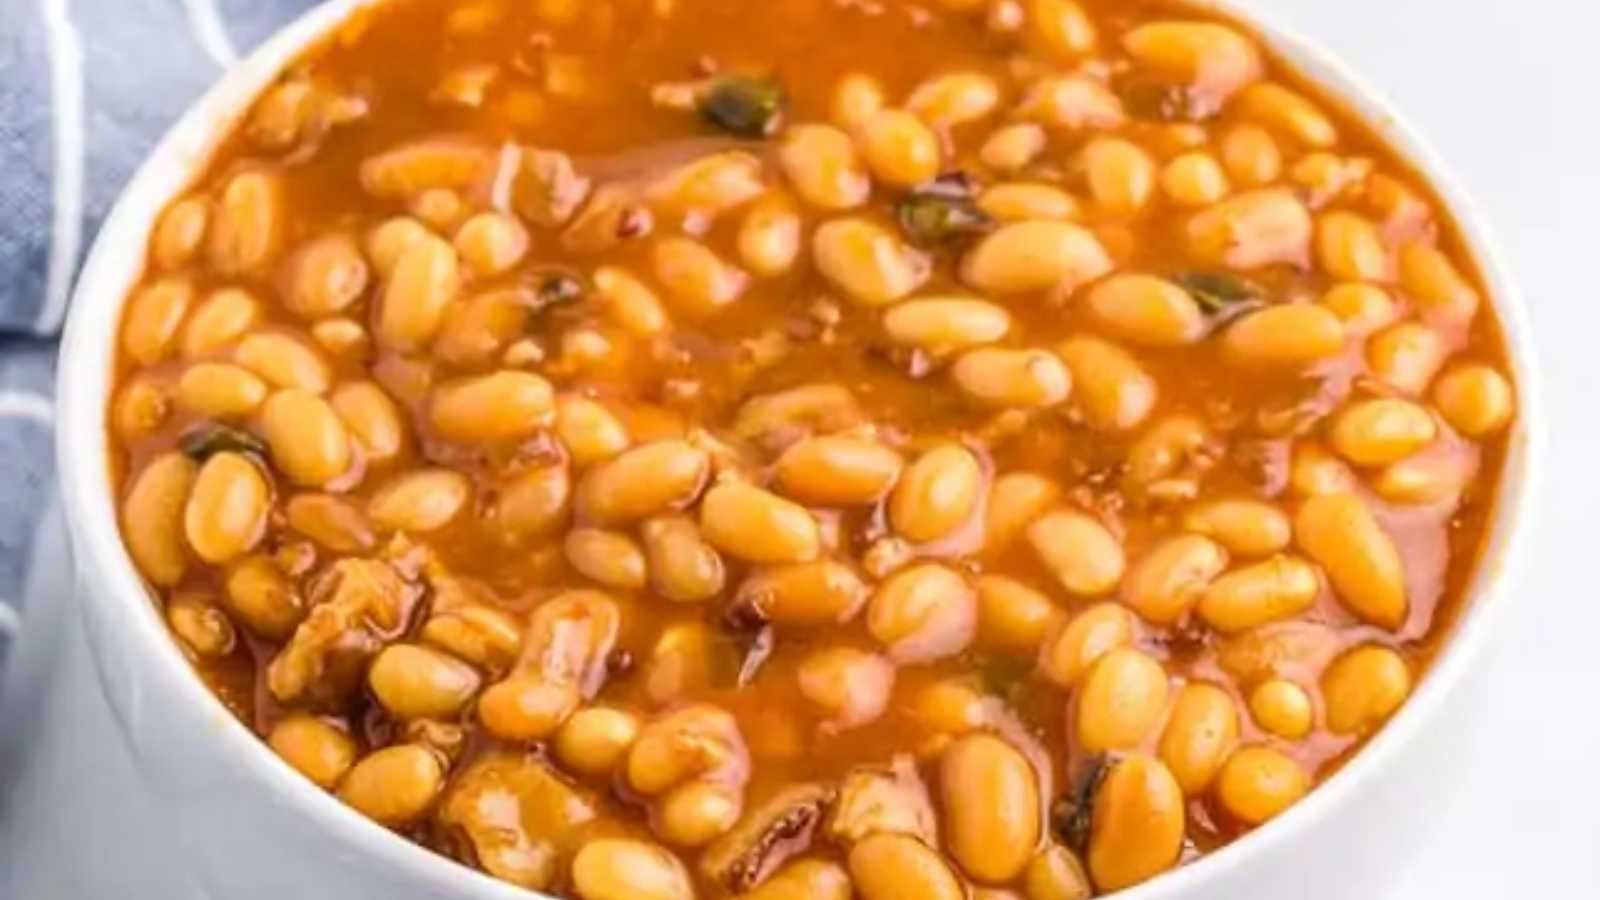 A bowl of bacon-infused baked beans, bathed in a sweet and savory sauce.